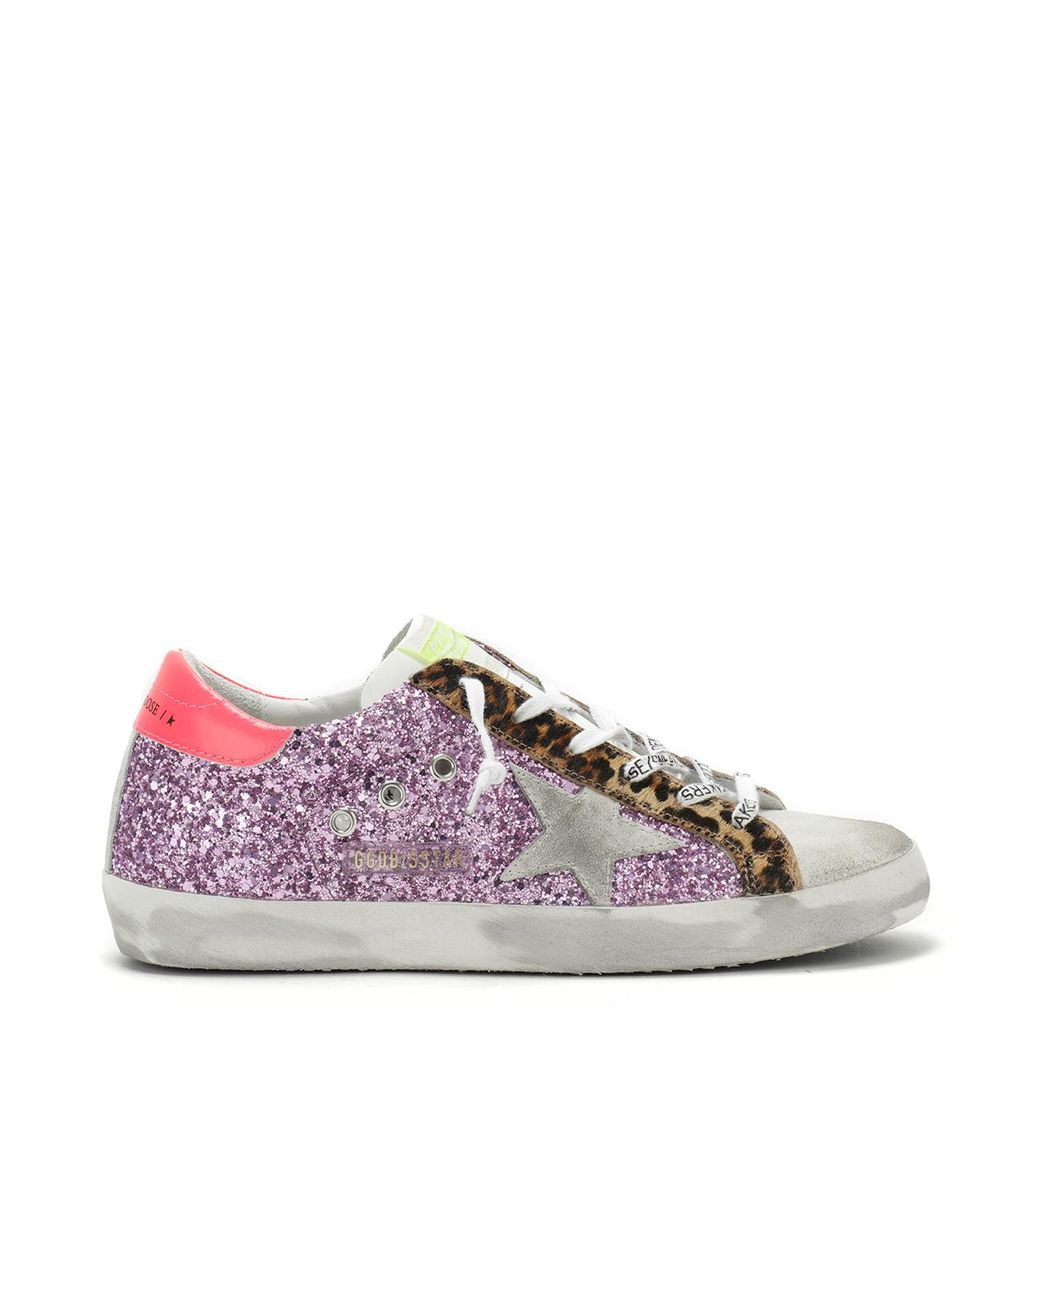 Golden Goose Deluxe Brand Suede Superstar Fuxia Glitter And Leopard ...